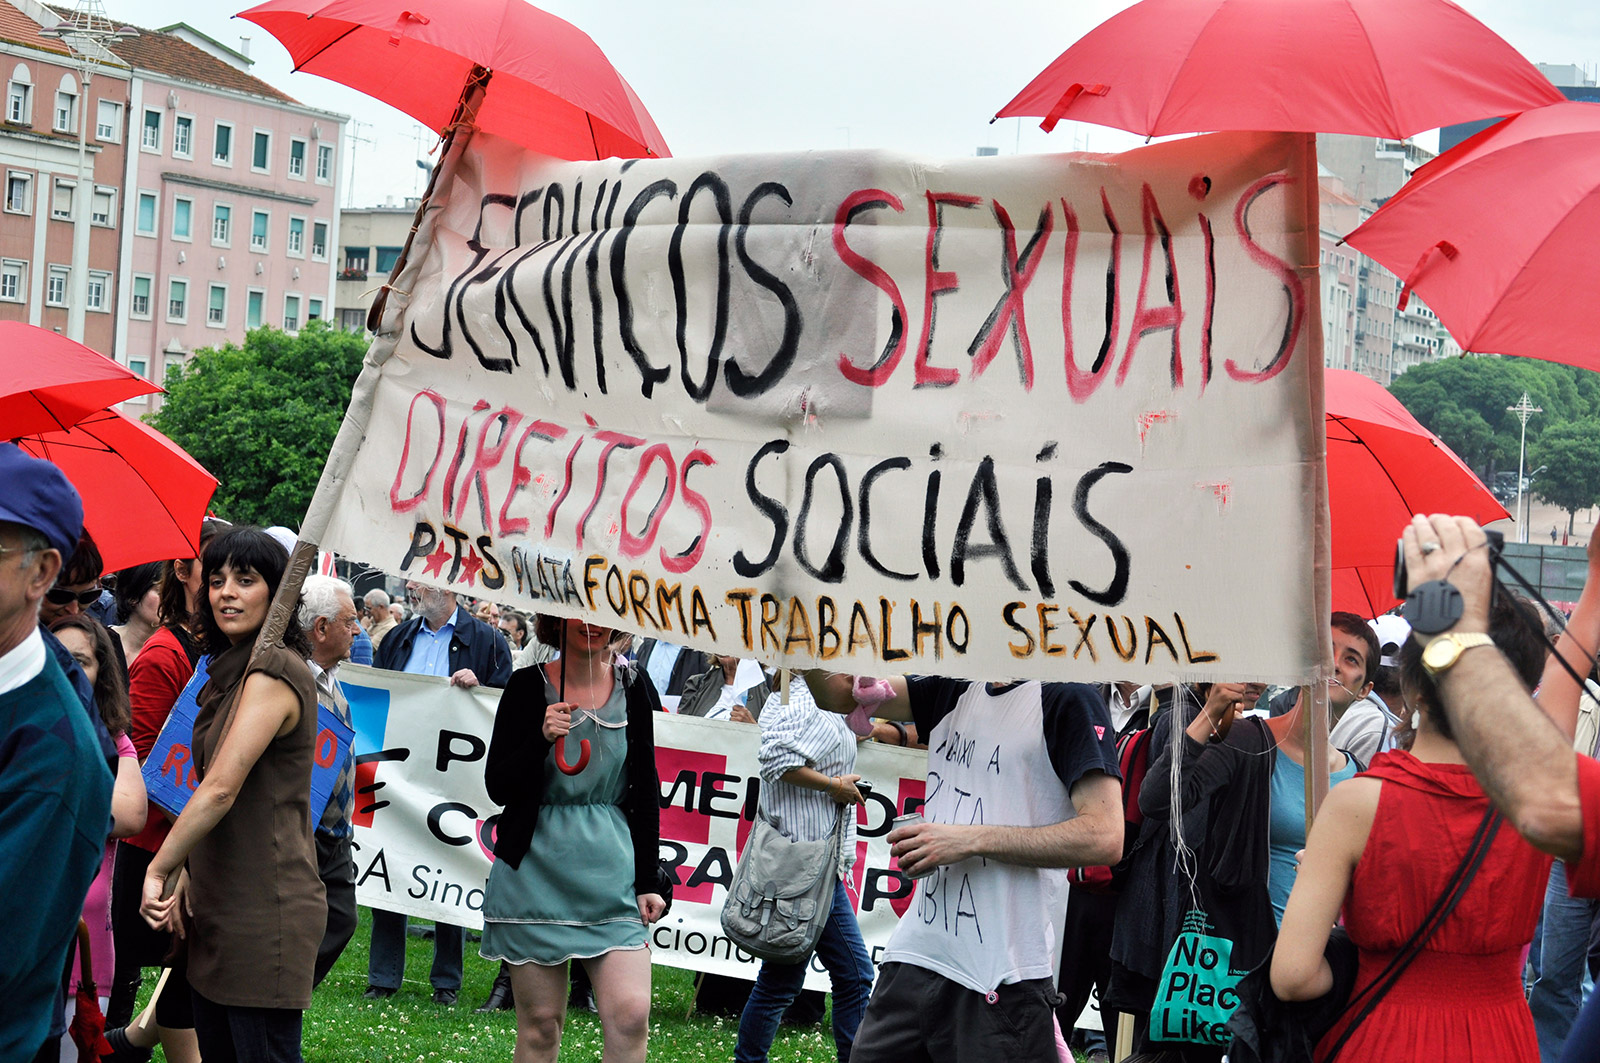 Access or sex workers rights in Portugal openDemocracy pic picture